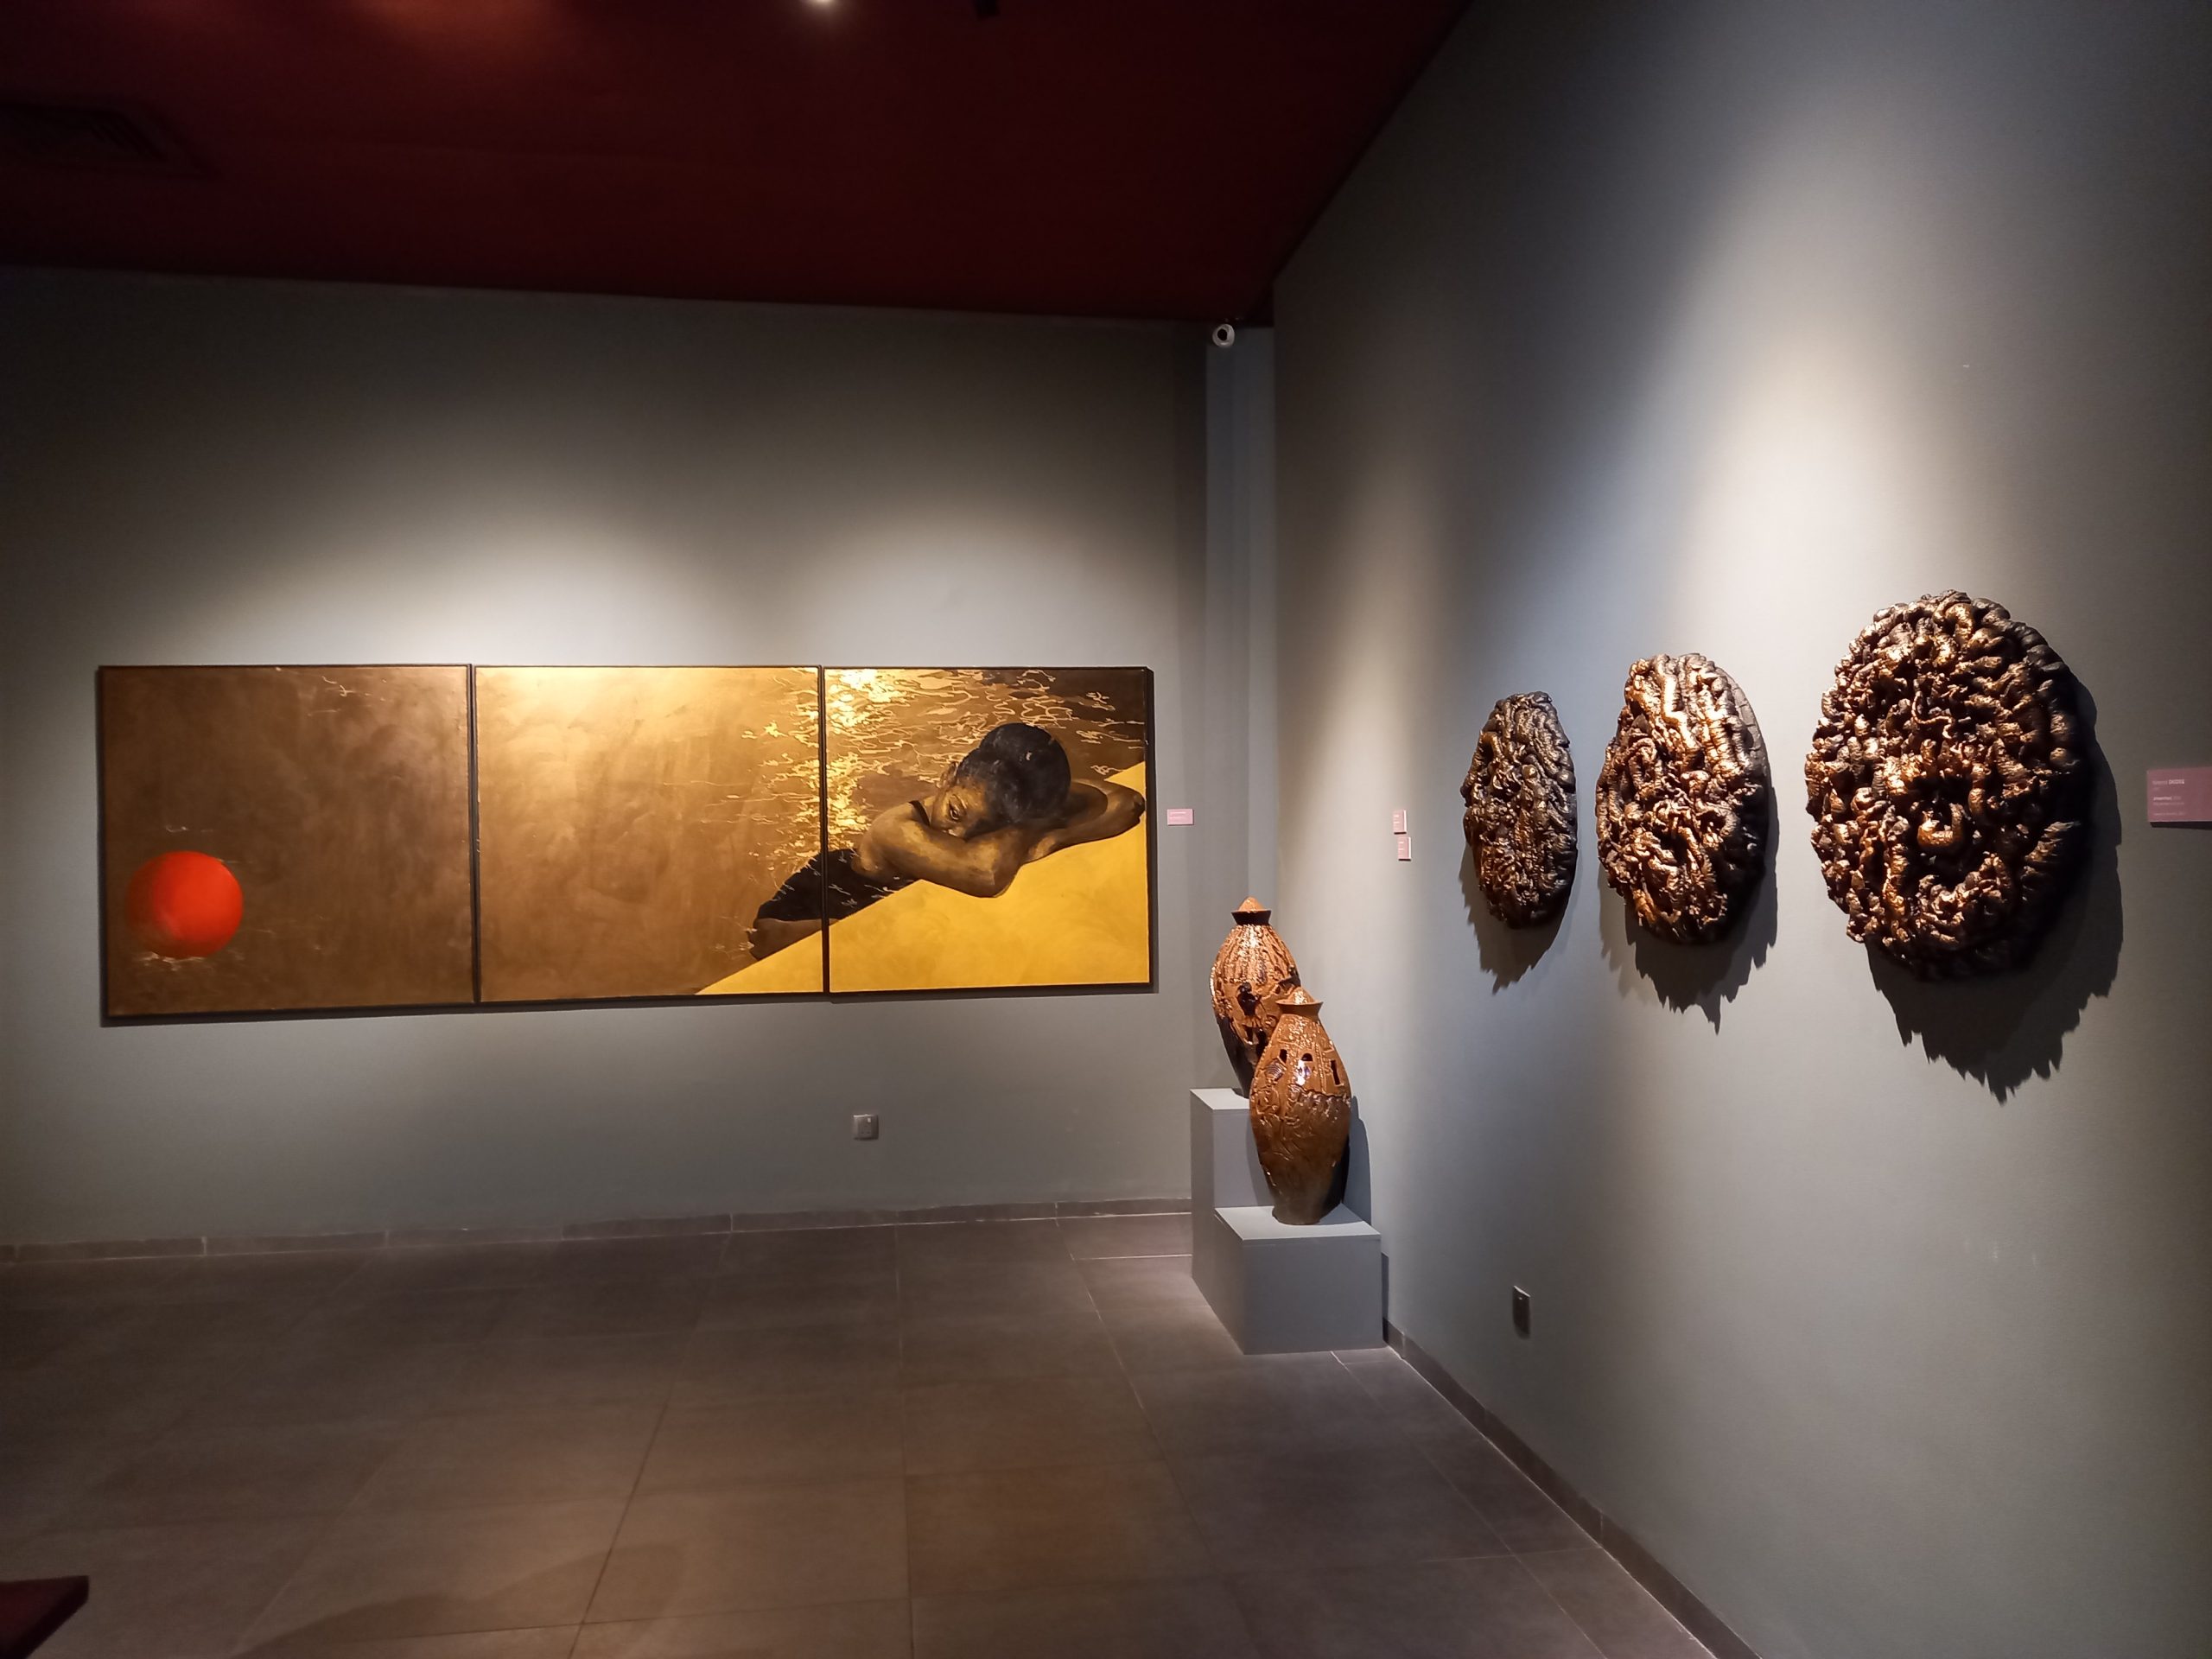 Invincible Hands (Installation view). Courtesy of the Yemisi Shyllon Museum of Art.